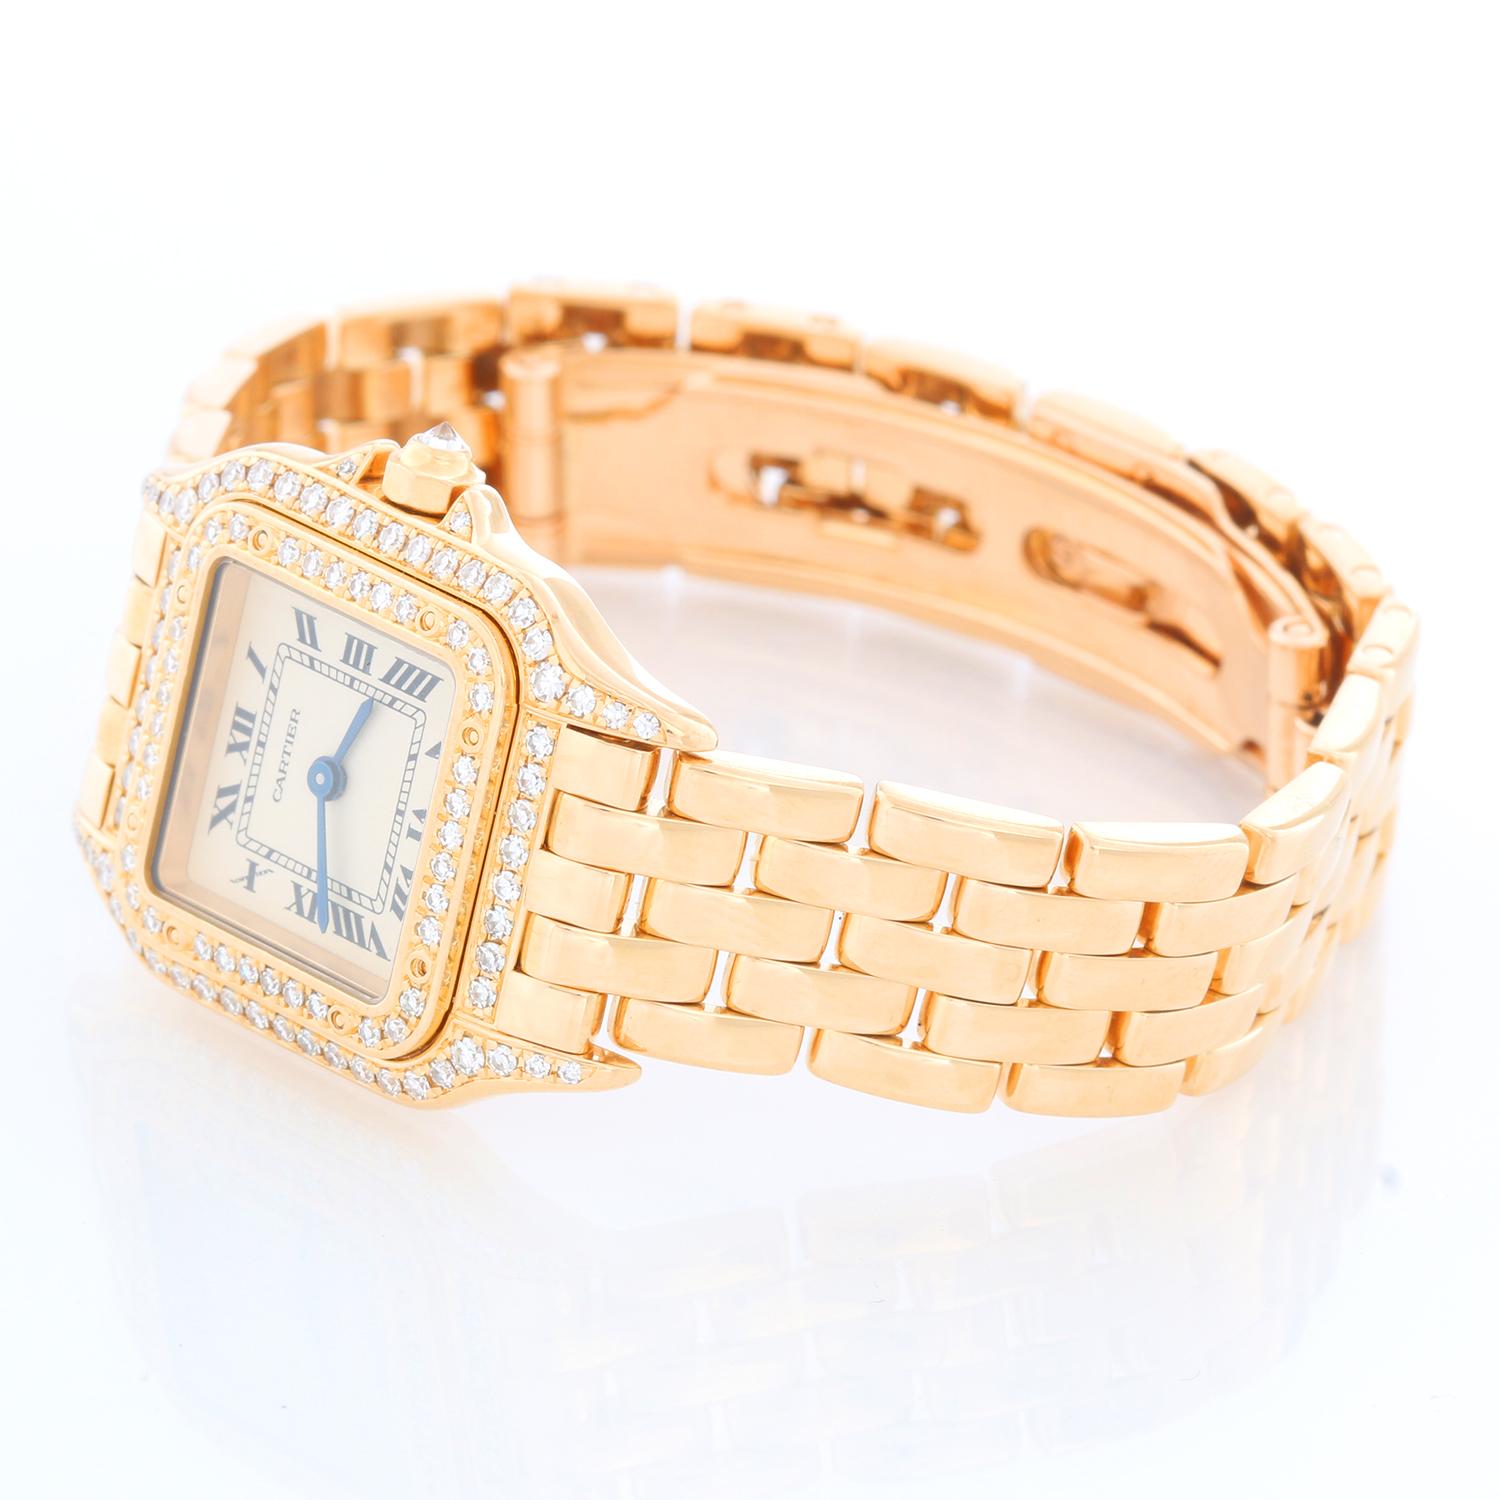 Cartier 18K Yellow Gold Panther Ladies Watch WF3254B9 1280 - Quartz. 18K Yellow Gold with diamonds (30 x 21 mm) ; Diamond bezel and lugs . Ivory dial with black Roman numerals. 18K Yellow Gold Panther bracelet with deployant buckle. Pre-owned with